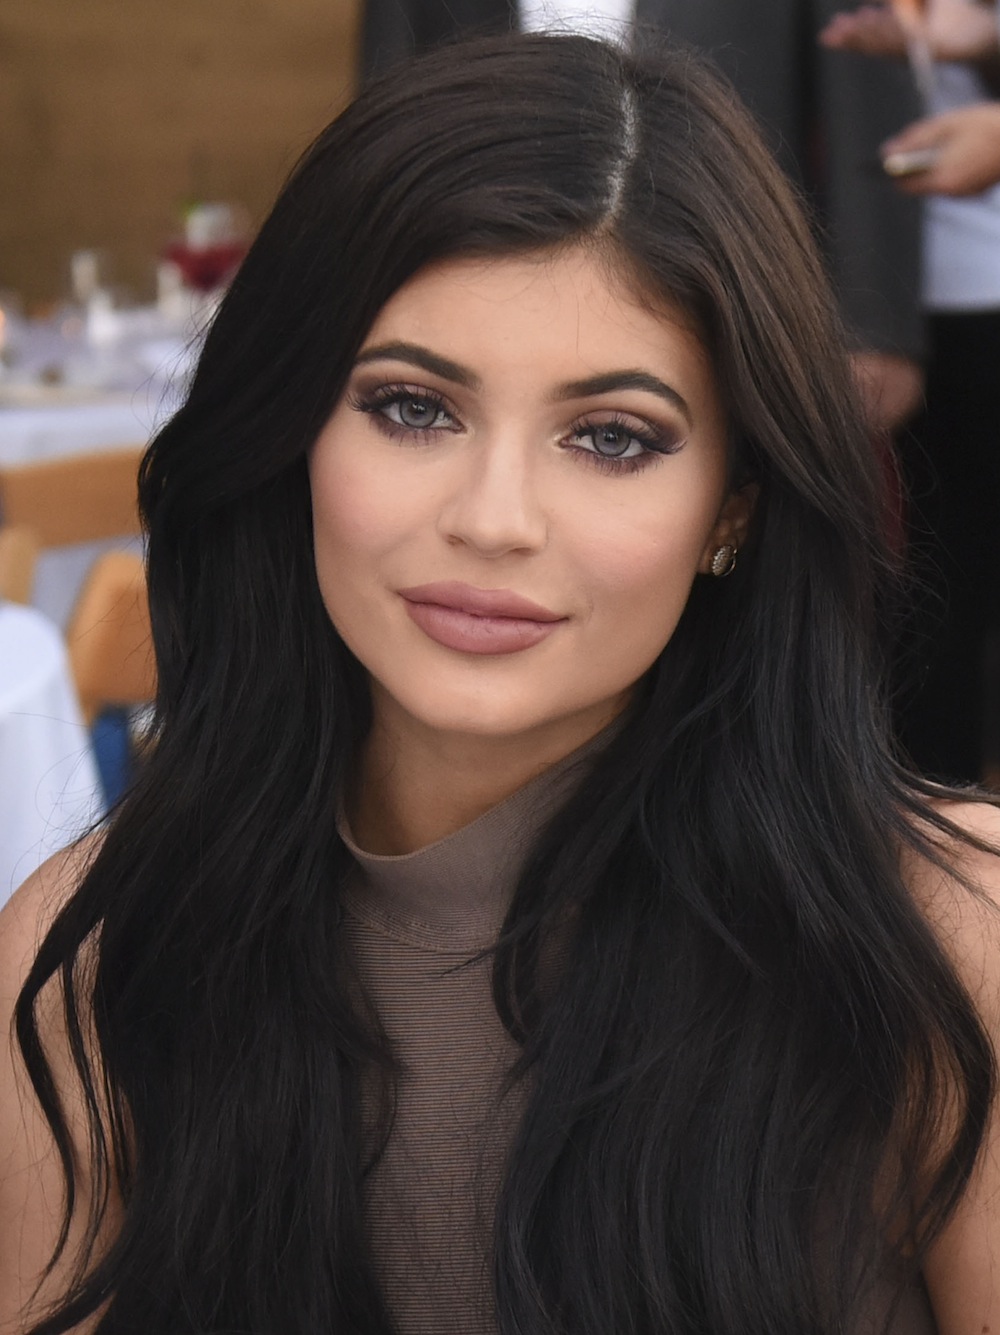 The Evolution of Kylie Jenner's Lips Over the Years